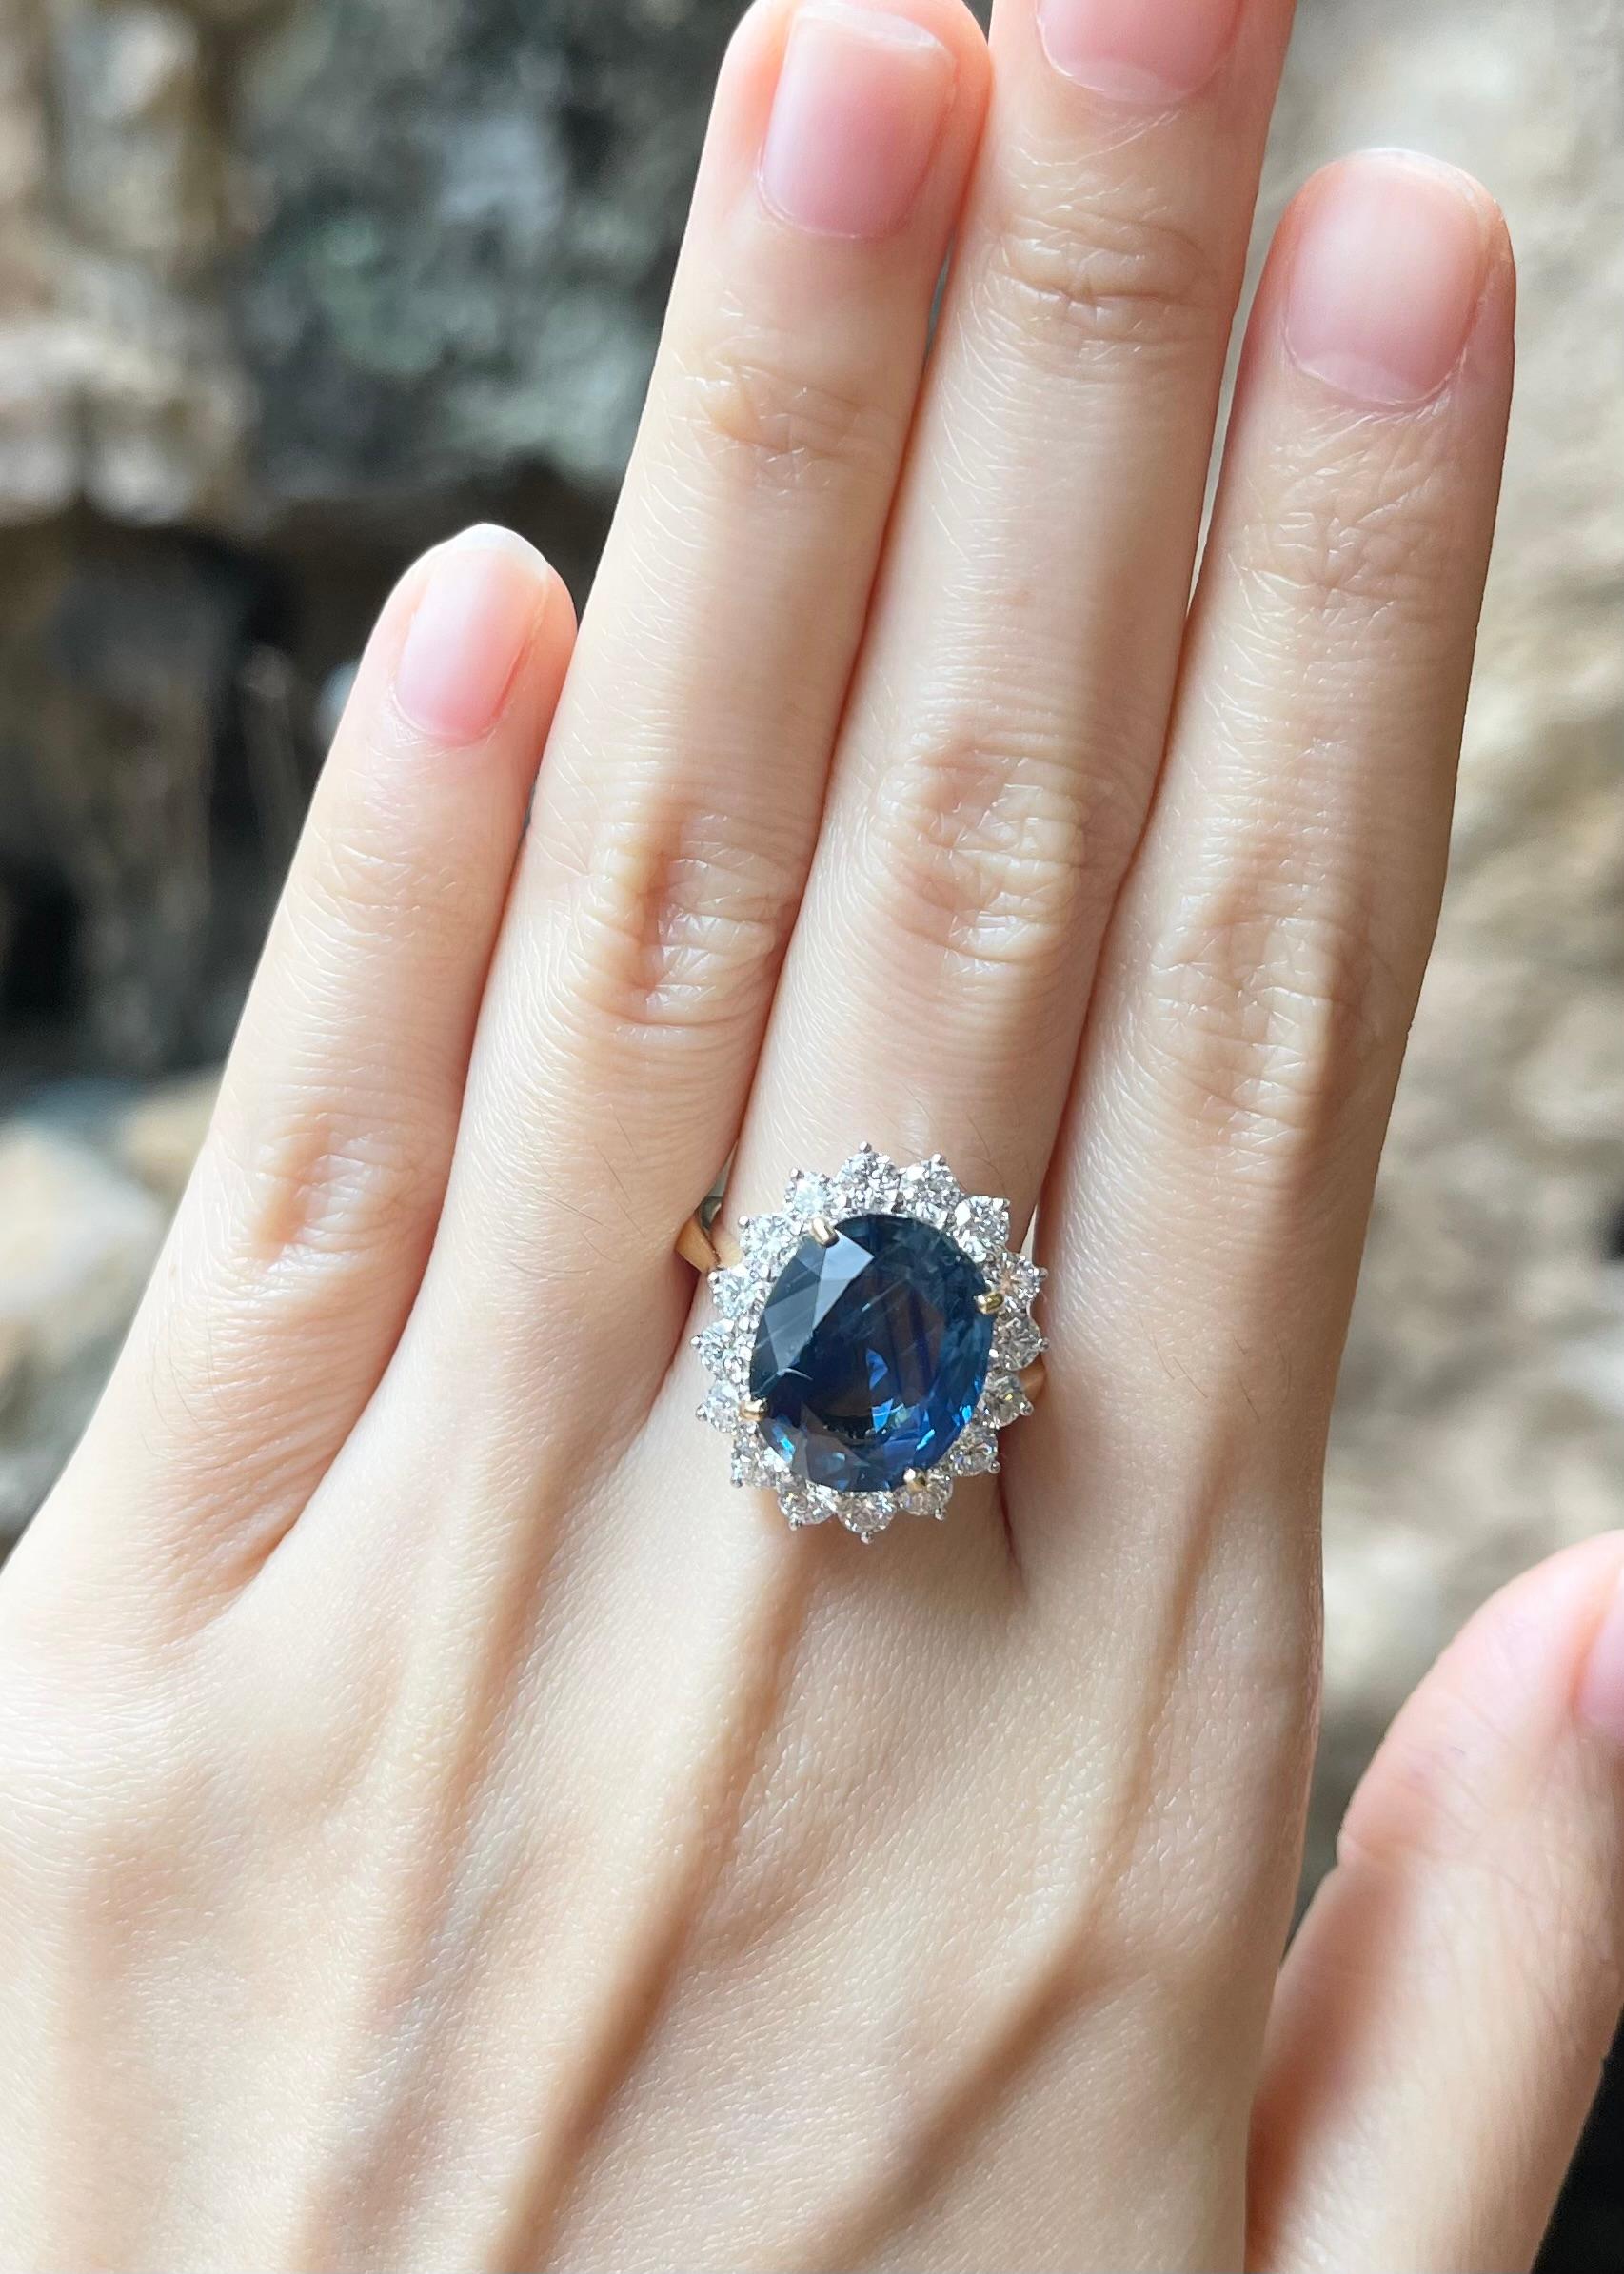 Blue Sapphire 8.81 carats with Diamond 1.44 carats Ring set in 18K Gold Settings

Width:  1.7 cm 
Length: 1.2 cm
Ring Size: 54
Total Weight: 9.46 grams

Blue Sapphire 
Width:  1.1 cm 
Length: 1.4 cm

